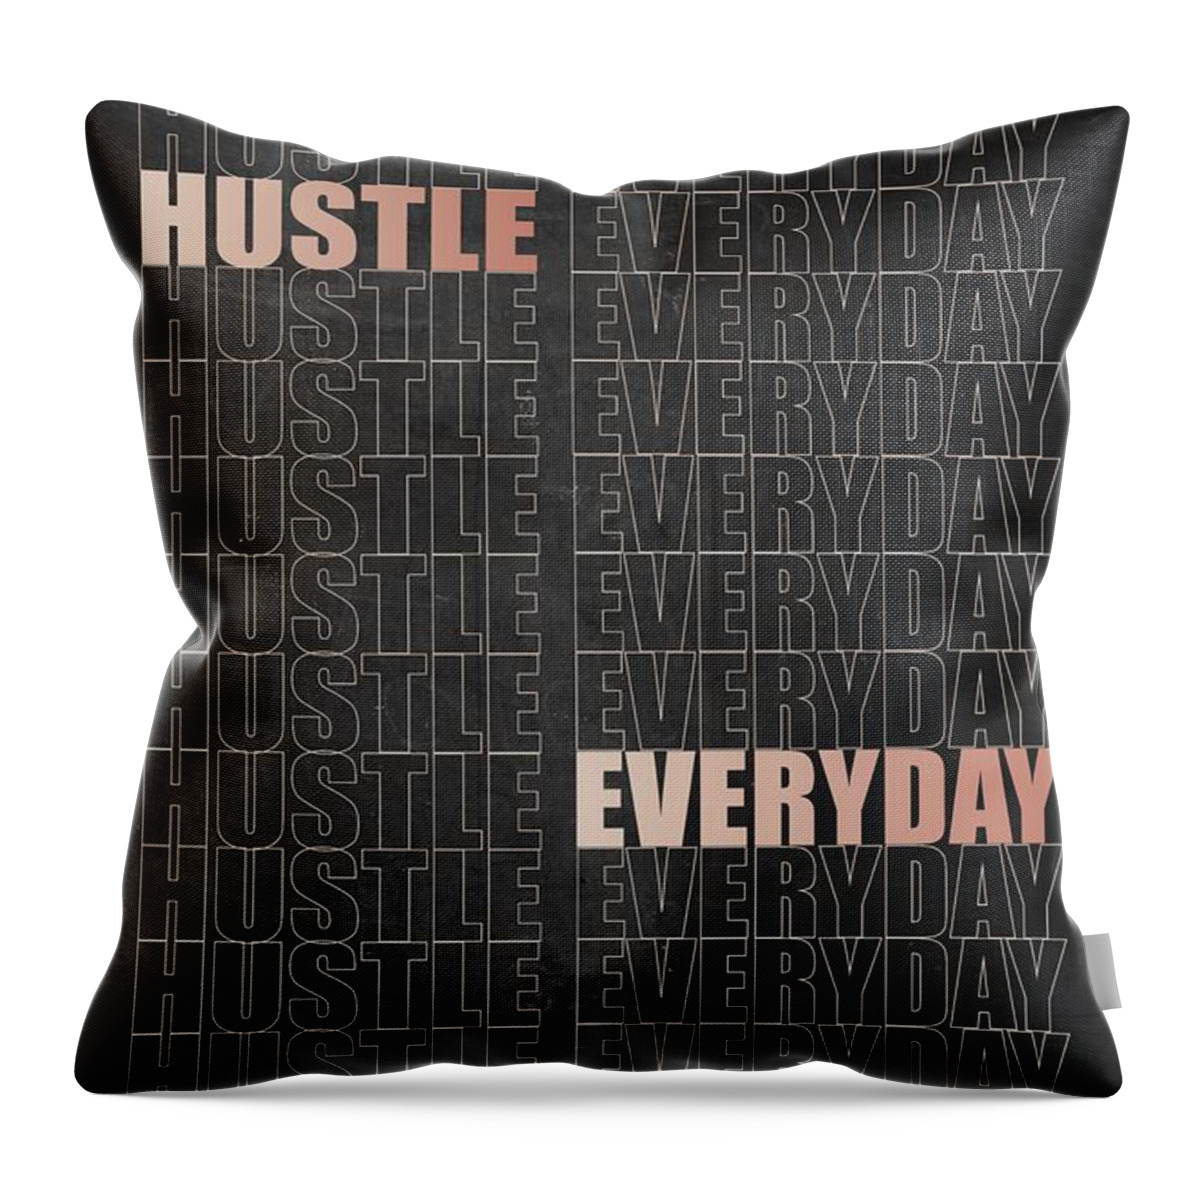  Throw Pillow featuring the digital art Hustle Everyday by Hustlinc